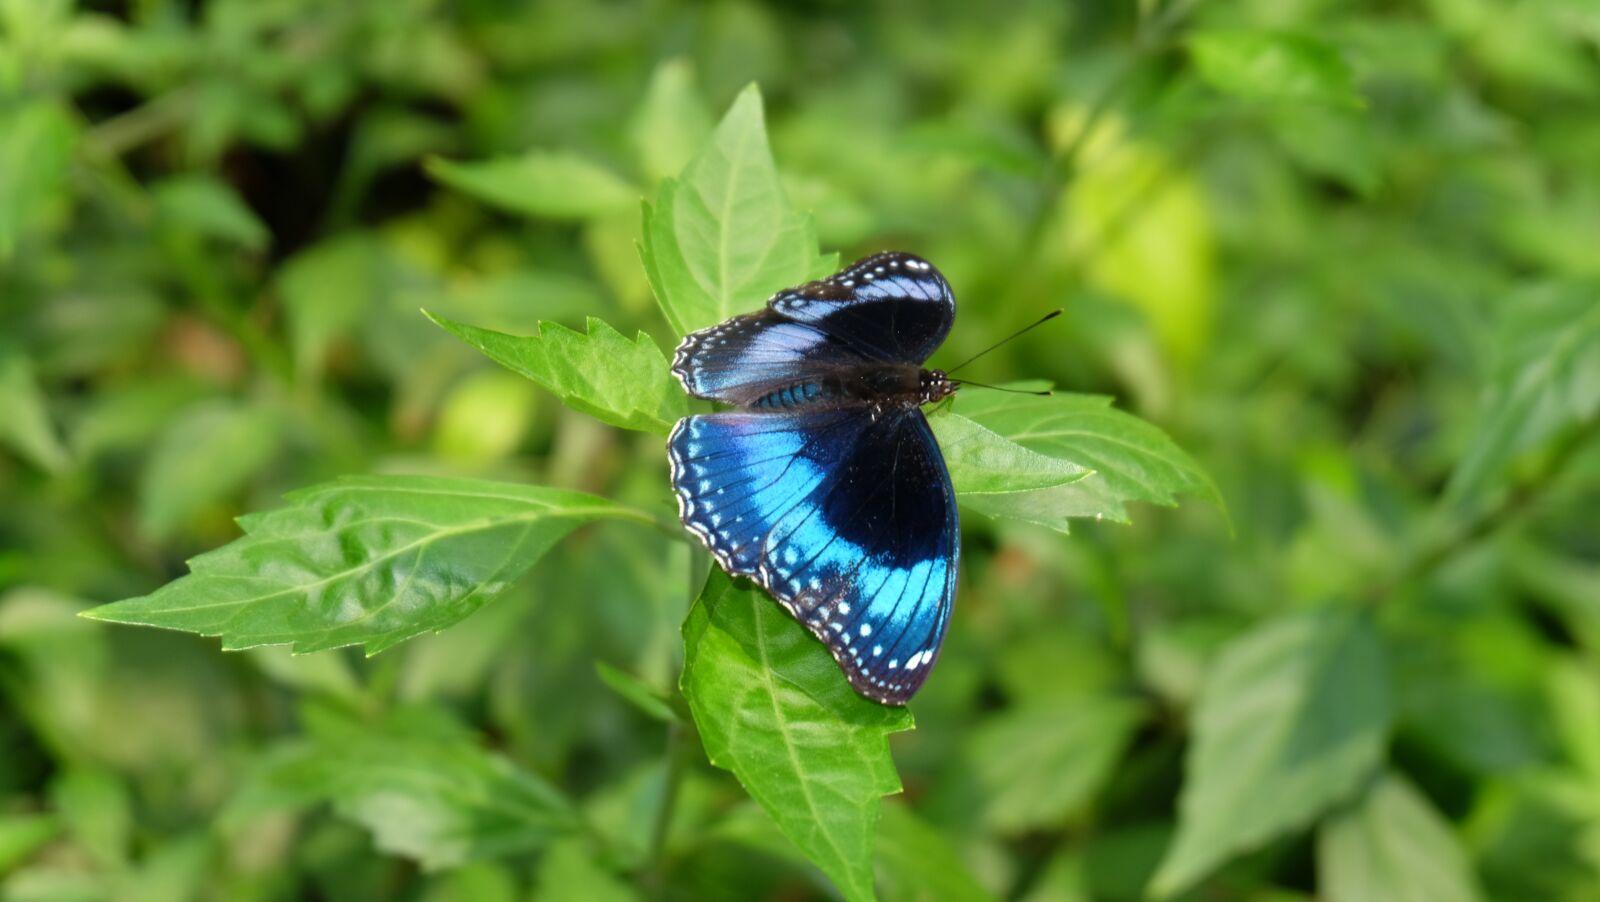 Fujifilm X-M1 sample photo. Butterfly, nature, colorful photography